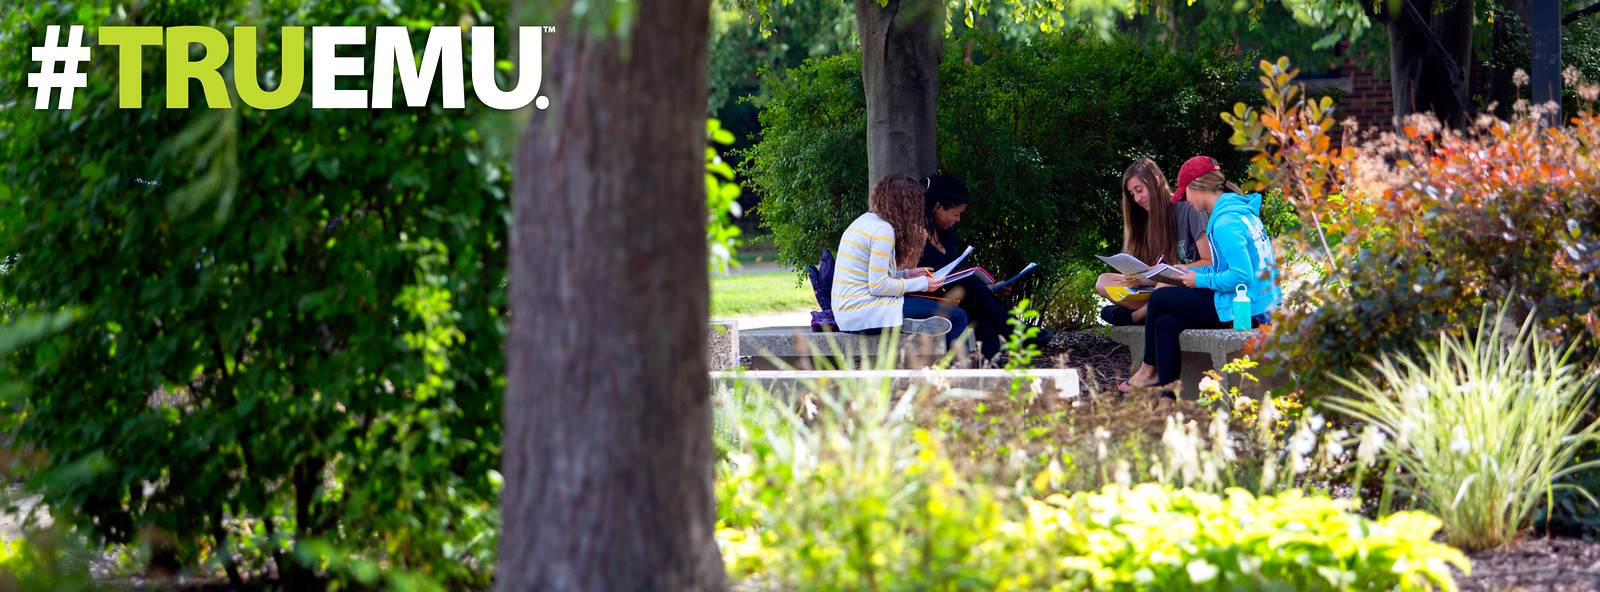 Four students study outdoors; the photo banner is labeled #TRUEMU.